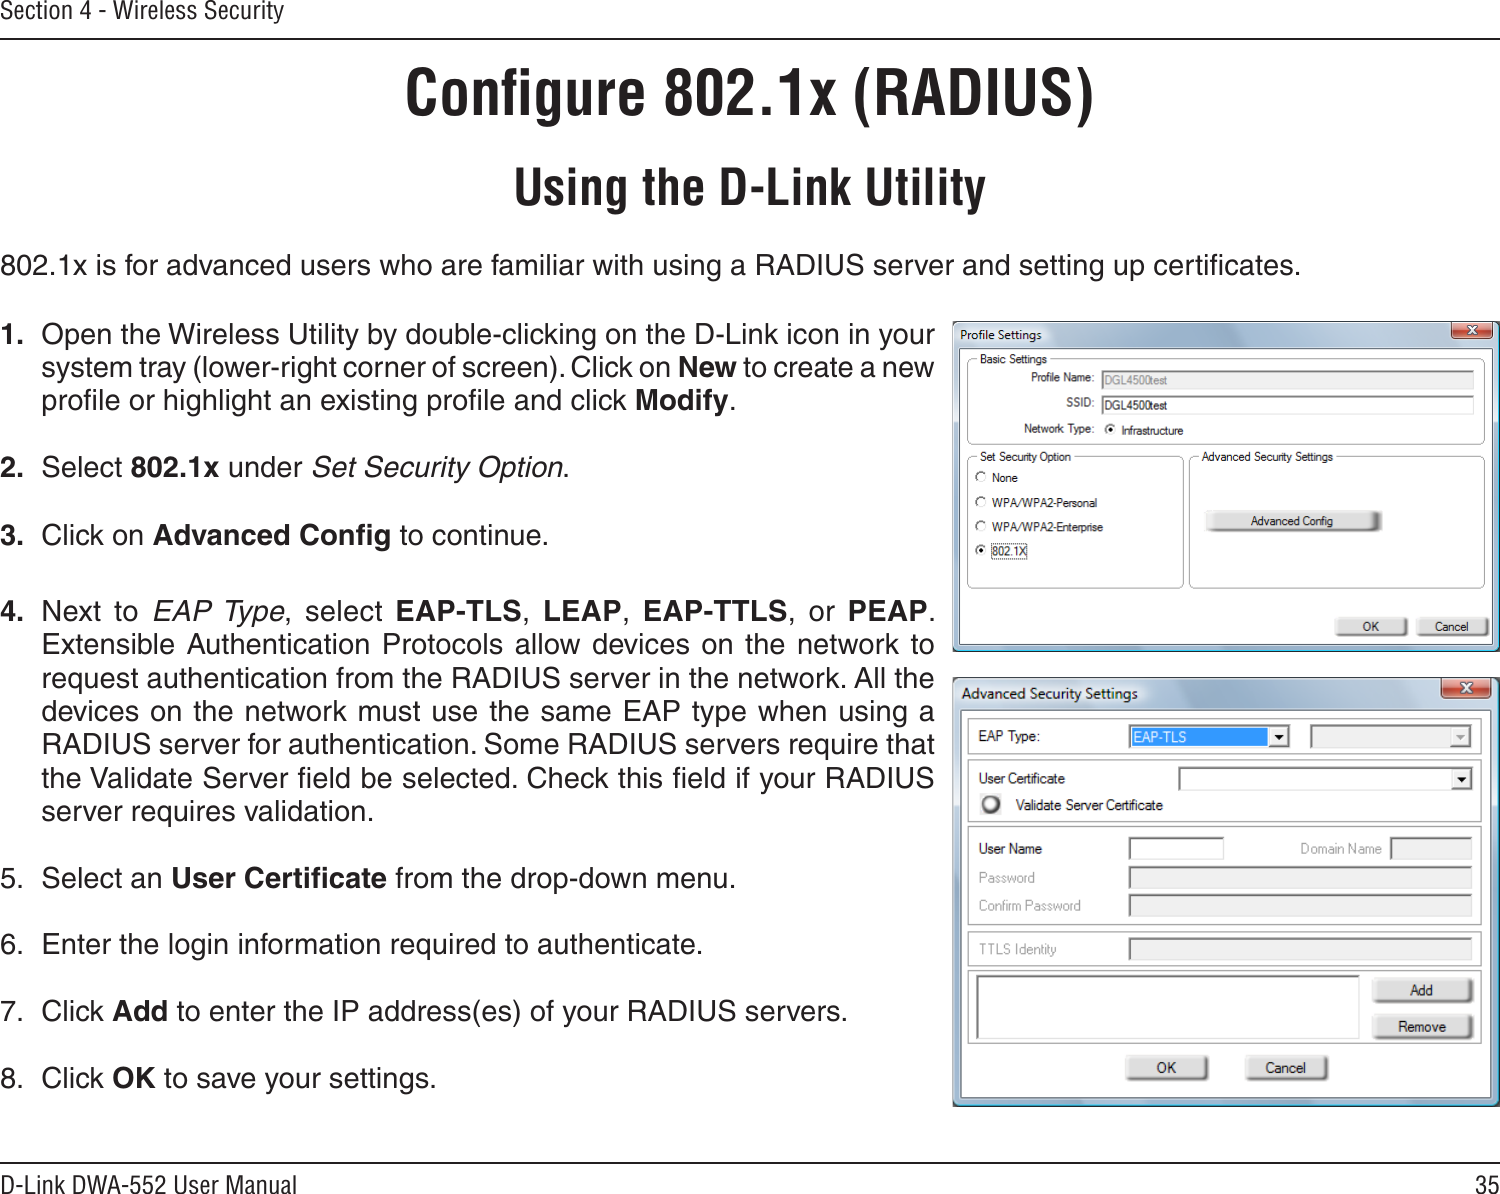 35D-Link DWA-552 User ManualSection 4 - Wireless SecurityConﬁgure 802.1x (RADIUS)Using the D-Link Utility802.1x is for advanced users who are familiar with using a RADIUS server and setting up certiﬁcates.1.  Open the Wireless Utility by double-clicking on the D-Link icon in your system tray (lower-right corner of screen). Click on New to create a new proﬁle or highlight an existing proﬁle and click Modify. 2.  Select 802.1x under Set Security Option.3.  Click on Advanced Conﬁg to continue.4.  Next  to  EAP Type,  select  EAP-TLS,  LEAP,  EAP-TTLS,  or  PEAP. Extensible  Authentication Protocols allow devices  on the network to request authentication from the RADIUS server in the network. All the devices on the network must use the same EAP type when using a RADIUS server for authentication. Some RADIUS servers require that the Validate Server ﬁeld be selected. Check this ﬁeld if your RADIUS server requires validation.5.  Select an User Certiﬁcate from the drop-down menu.6.  Enter the login information required to authenticate.7.  Click Add to enter the IP address(es) of your RADIUS servers.8.  Click OK to save your settings.